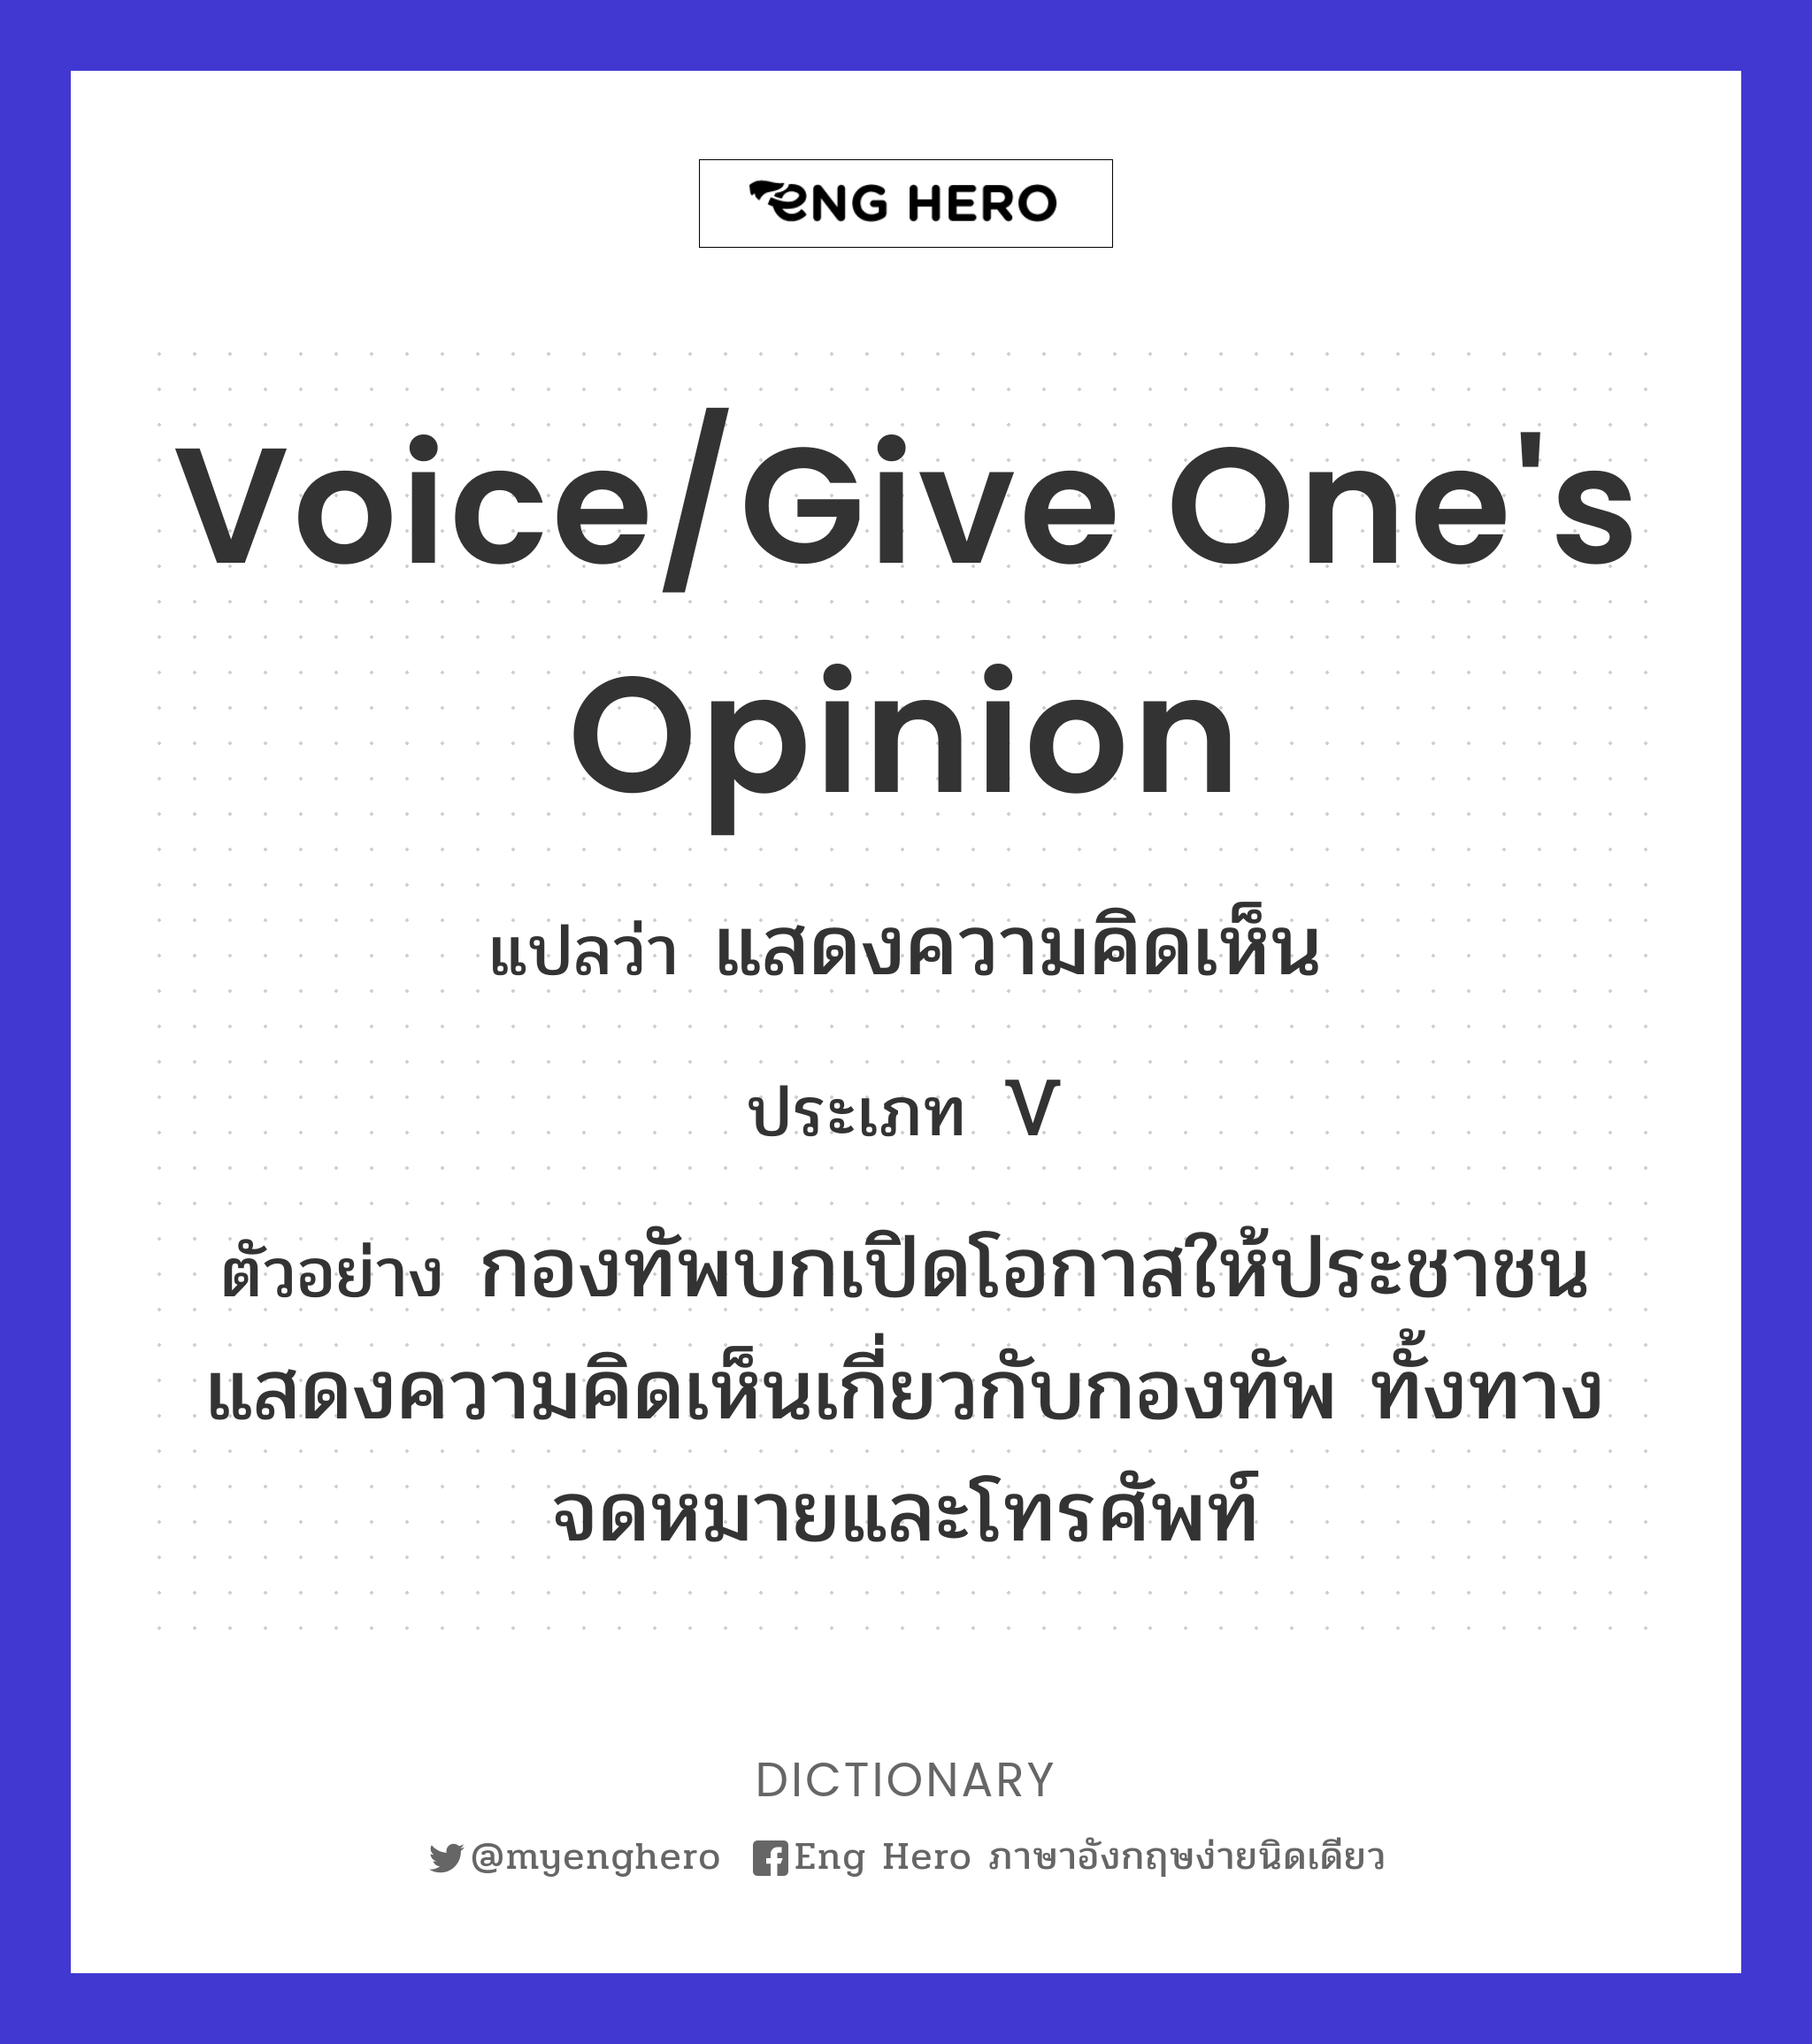 voice/give one's opinion